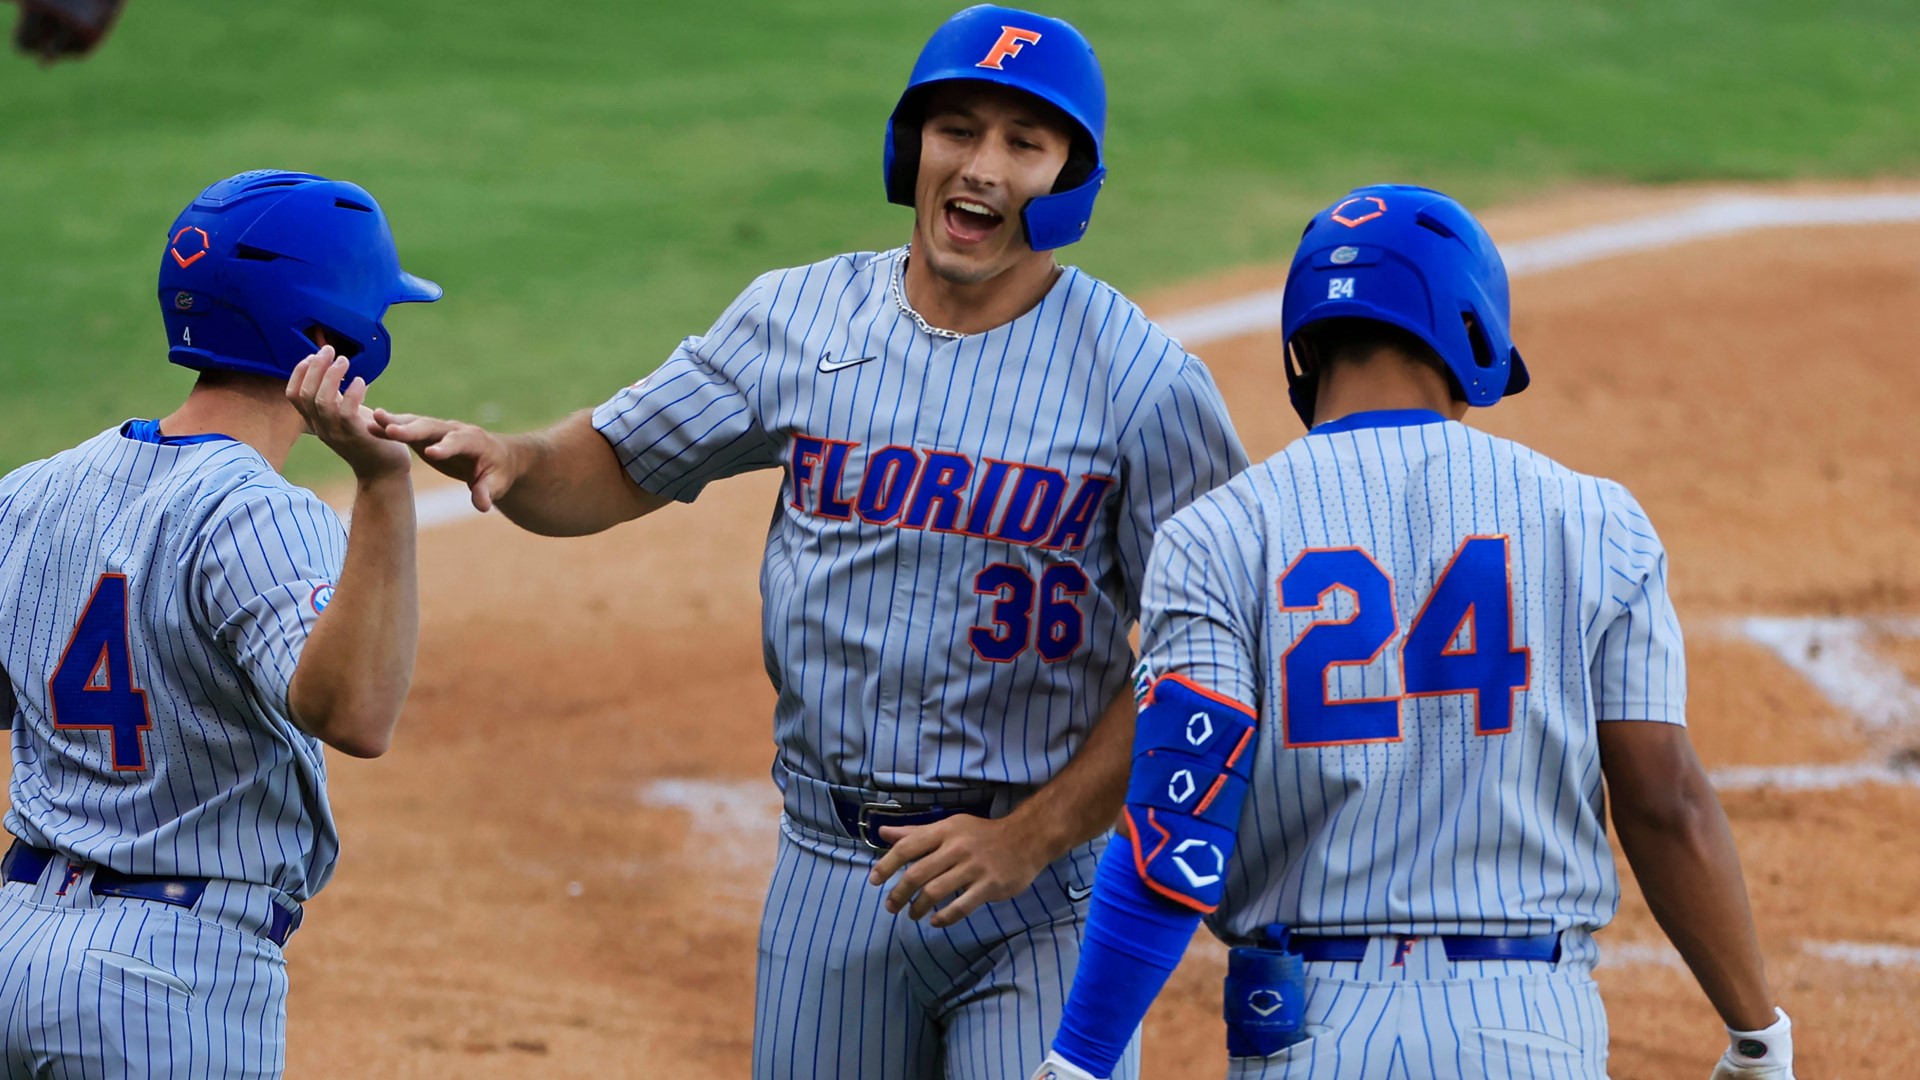 A fifth College World Series berth for the Gators will depend on